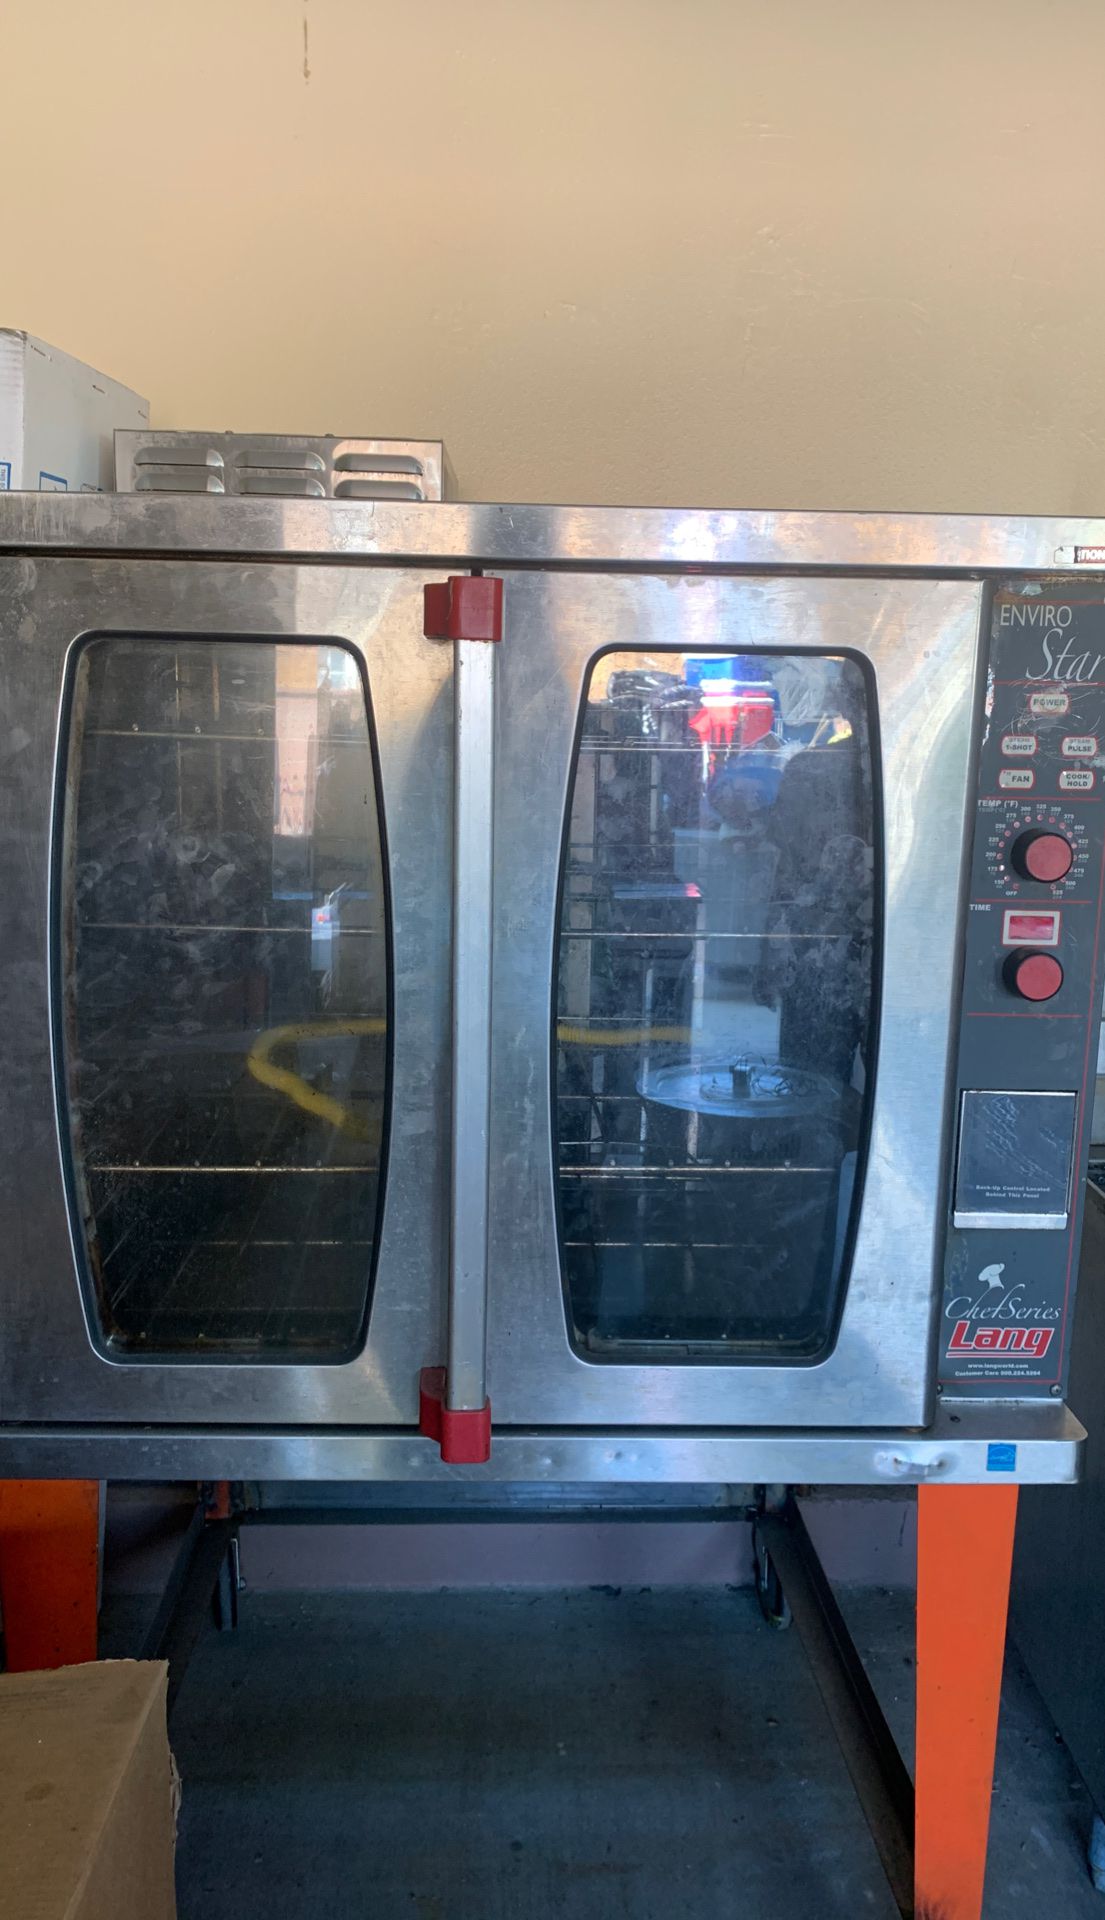 convection / Steamer oven